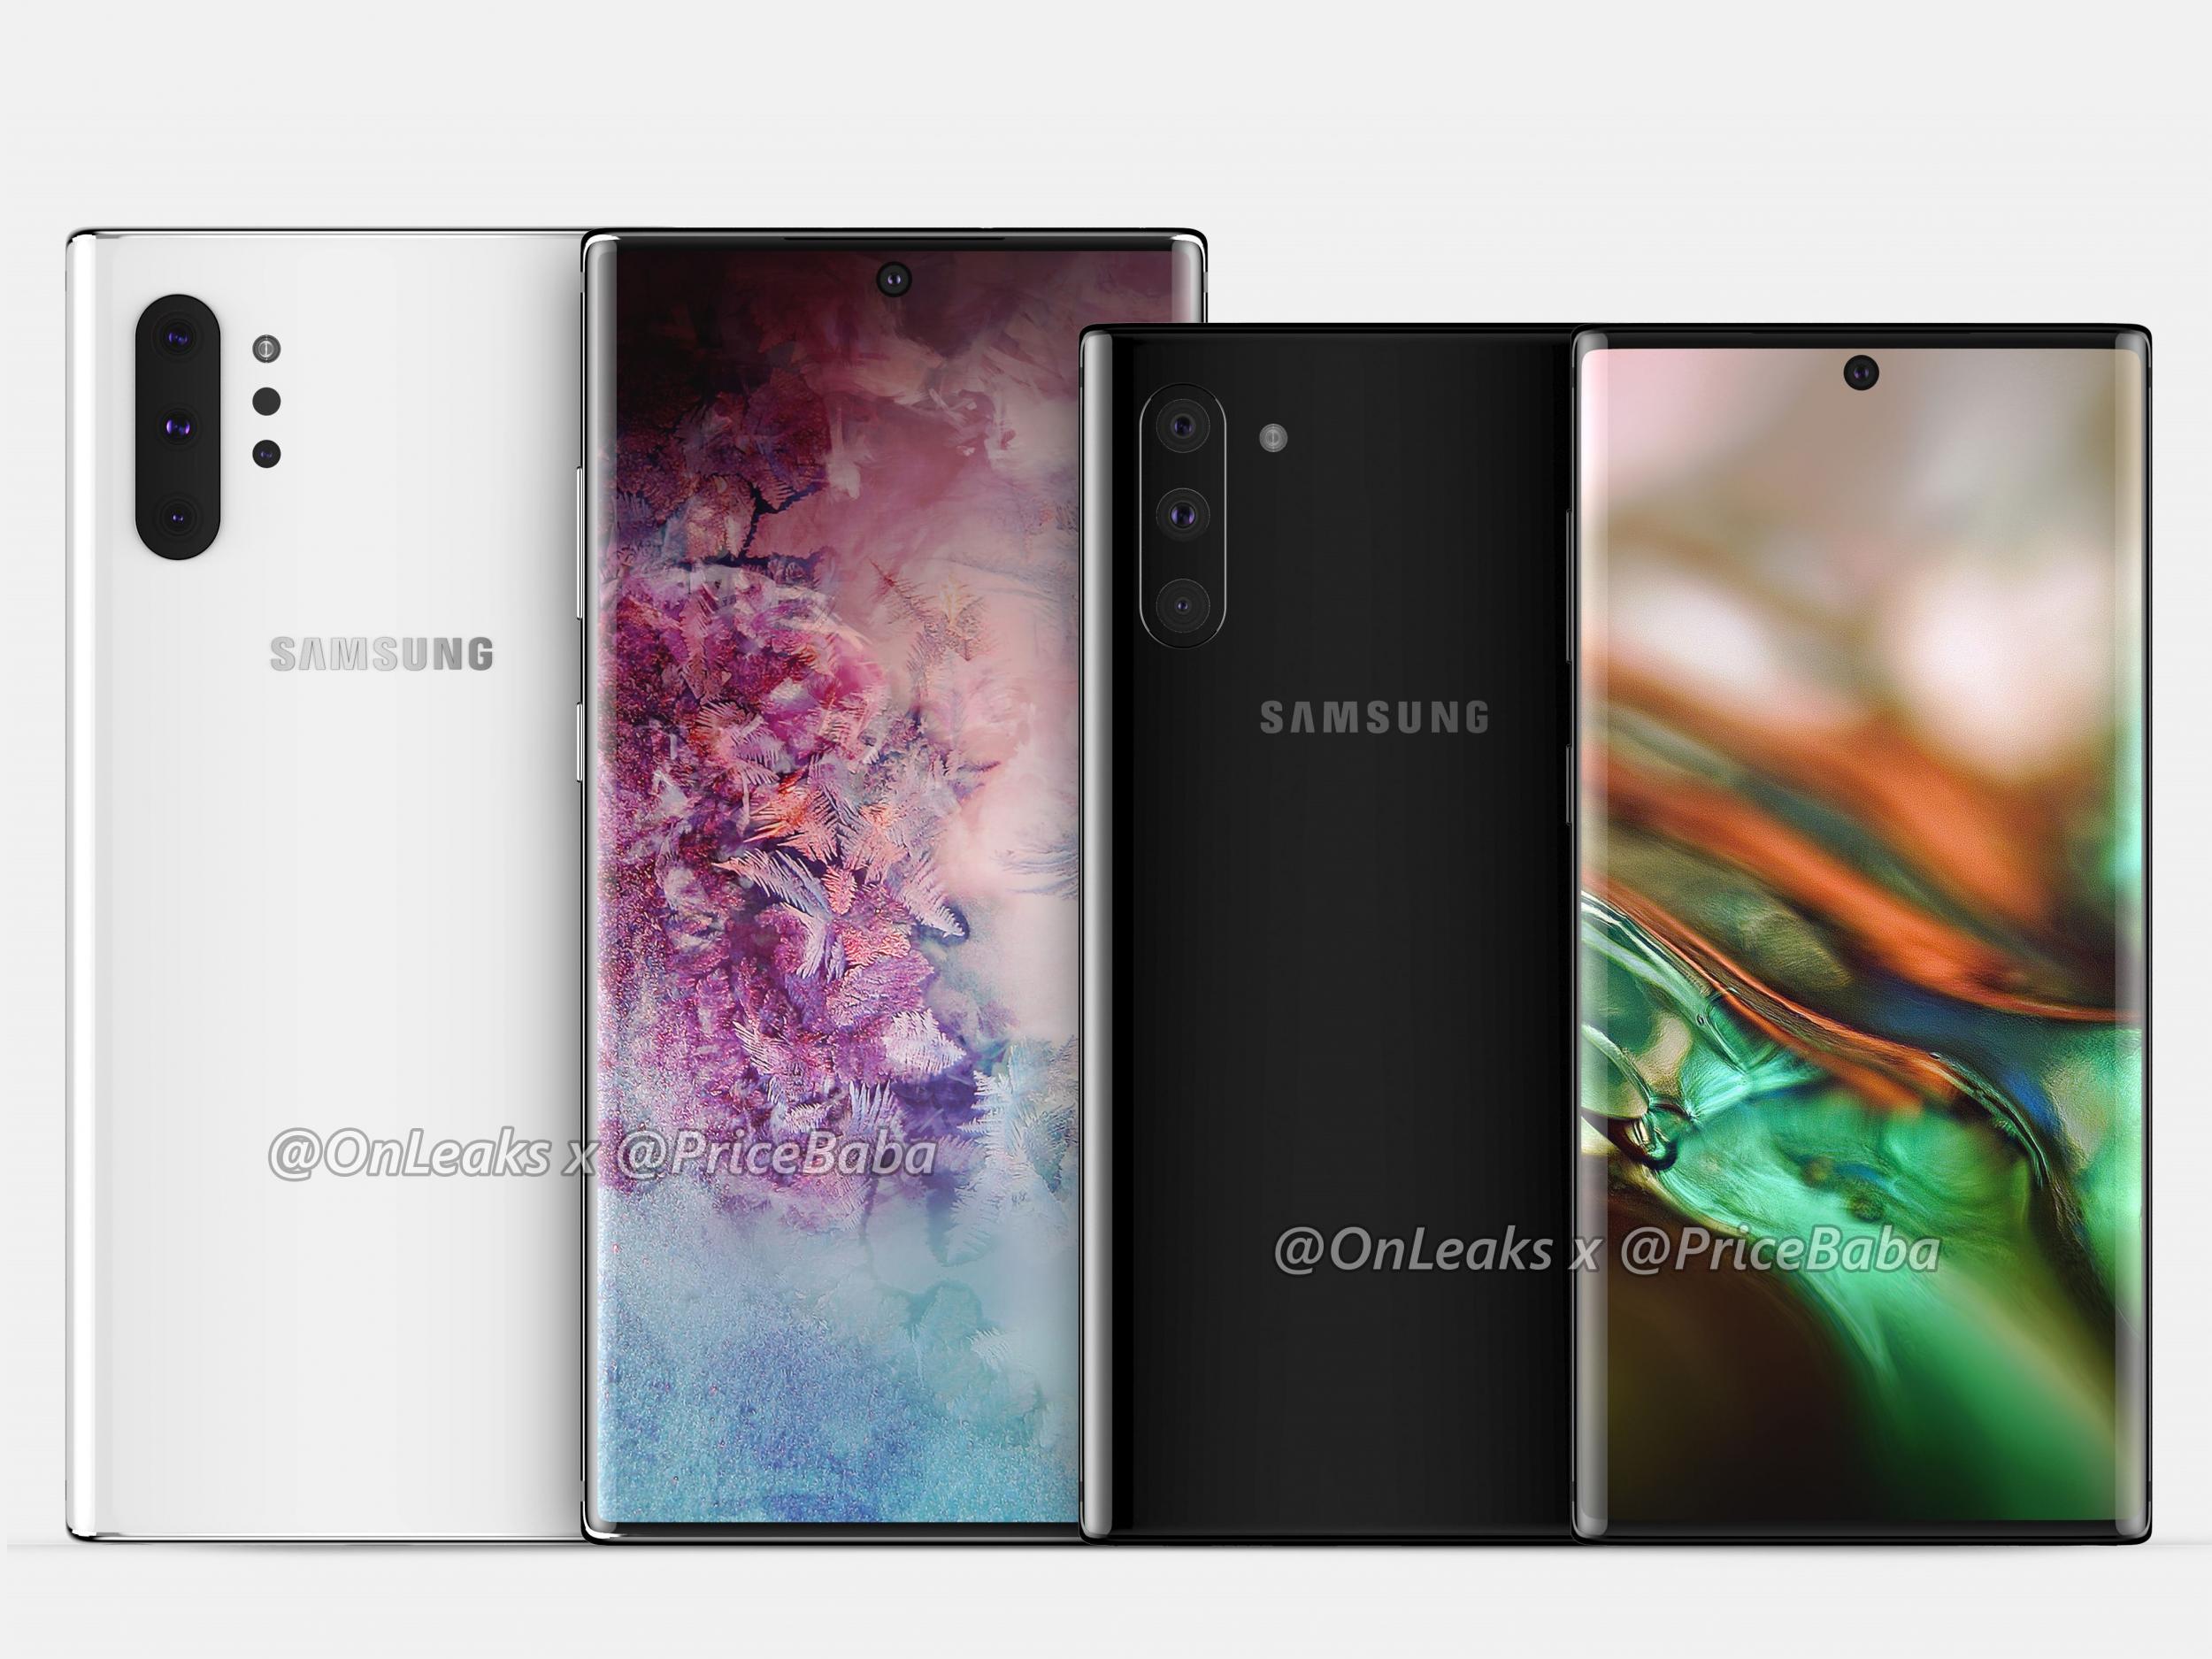 Renders of the Galaxy Note 10 based on leaked and expected specs of the new Samsung smartphone